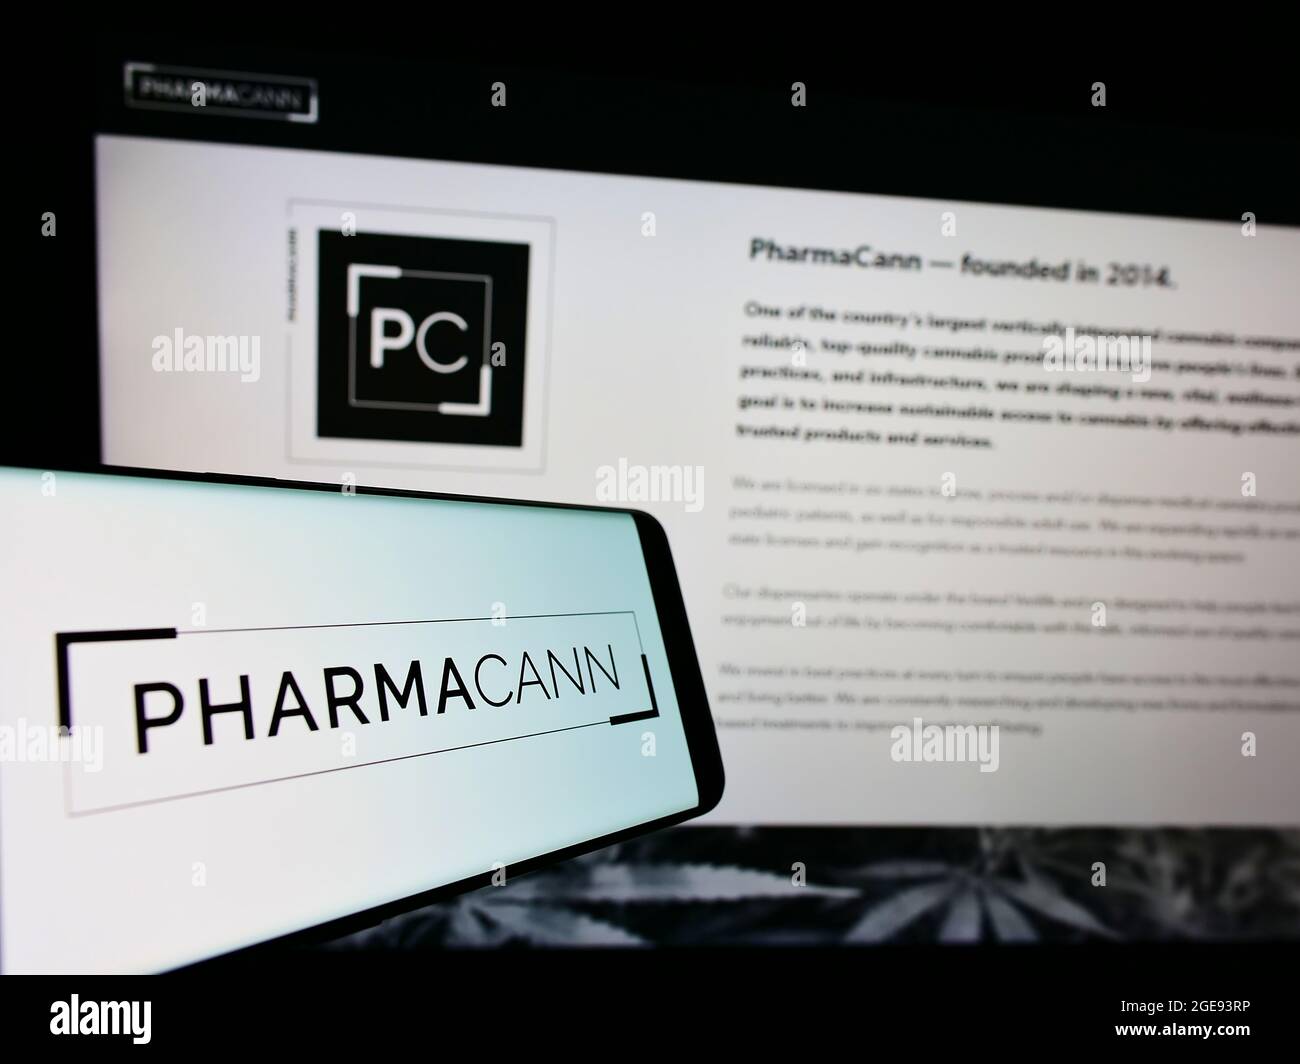 Cellphone with logo of US cannabis company PharmaCann Inc. on screen in front of business website. Focus on center-right of phone display. Stock Photo